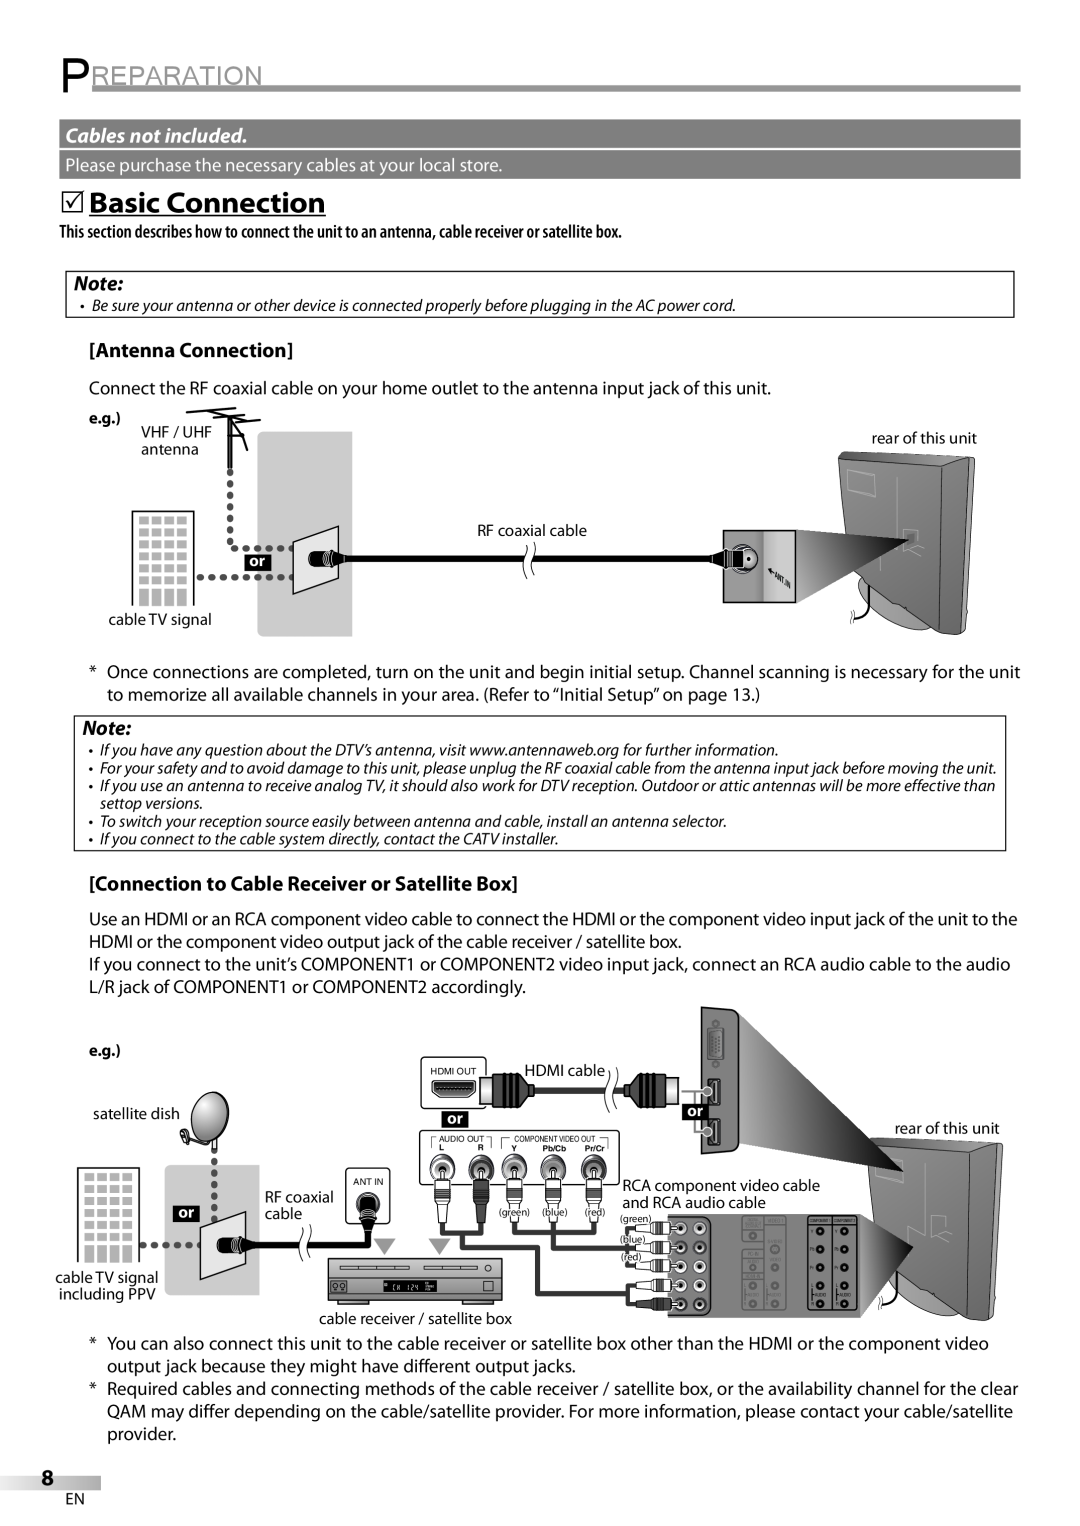 Sylvania LC370SS9 owner manual Preparation, 5Basic Connection, Cables not included, Antenna Connection 